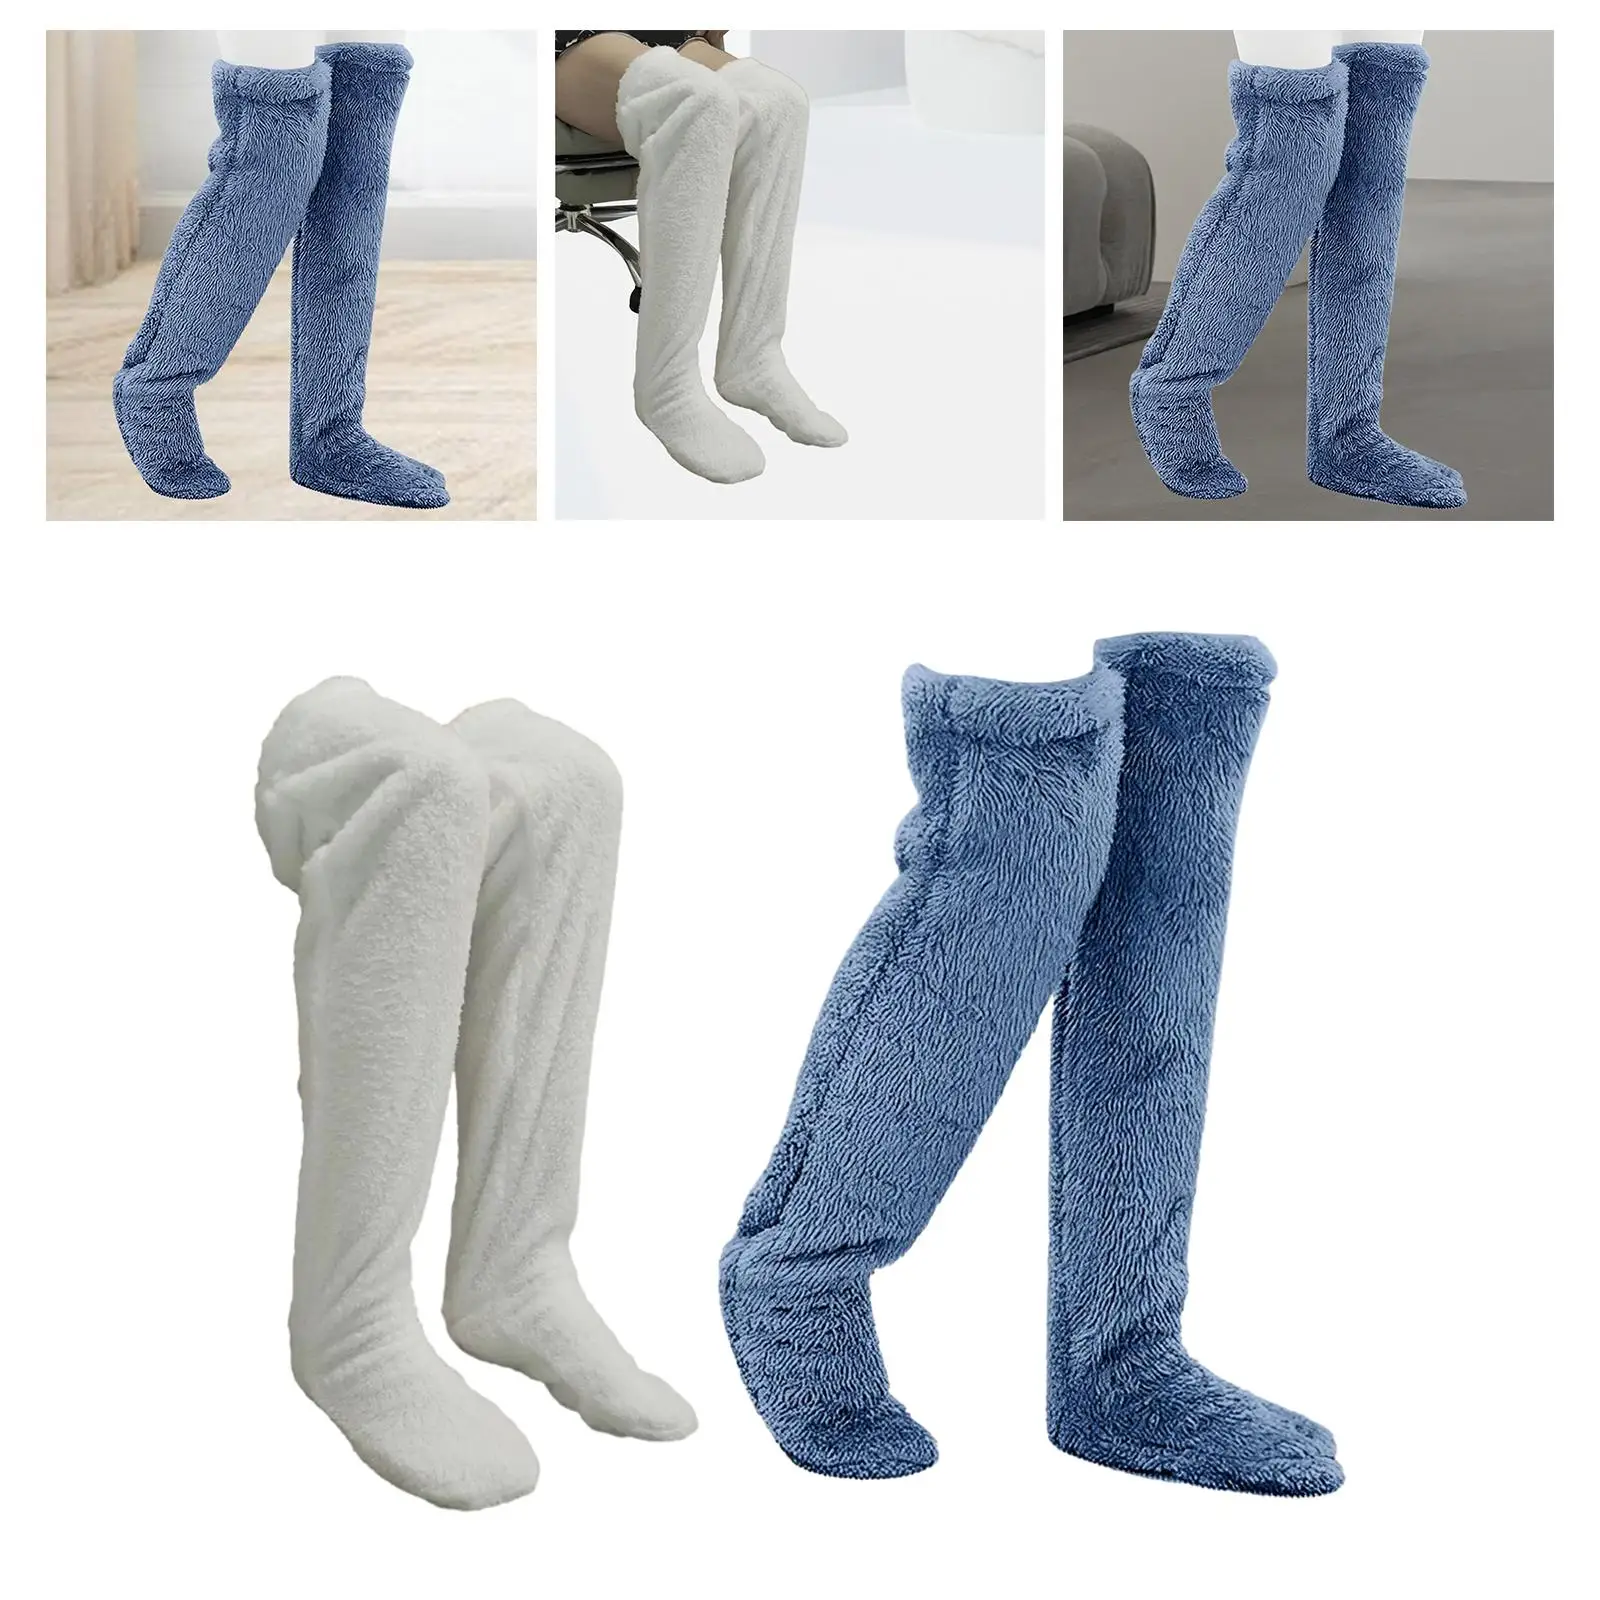 Womens Leg Warmers Fuzzy Leg Warmers Winter Boot Cuffs Cover Boot Toppers High Heels Boots Warm Stockings